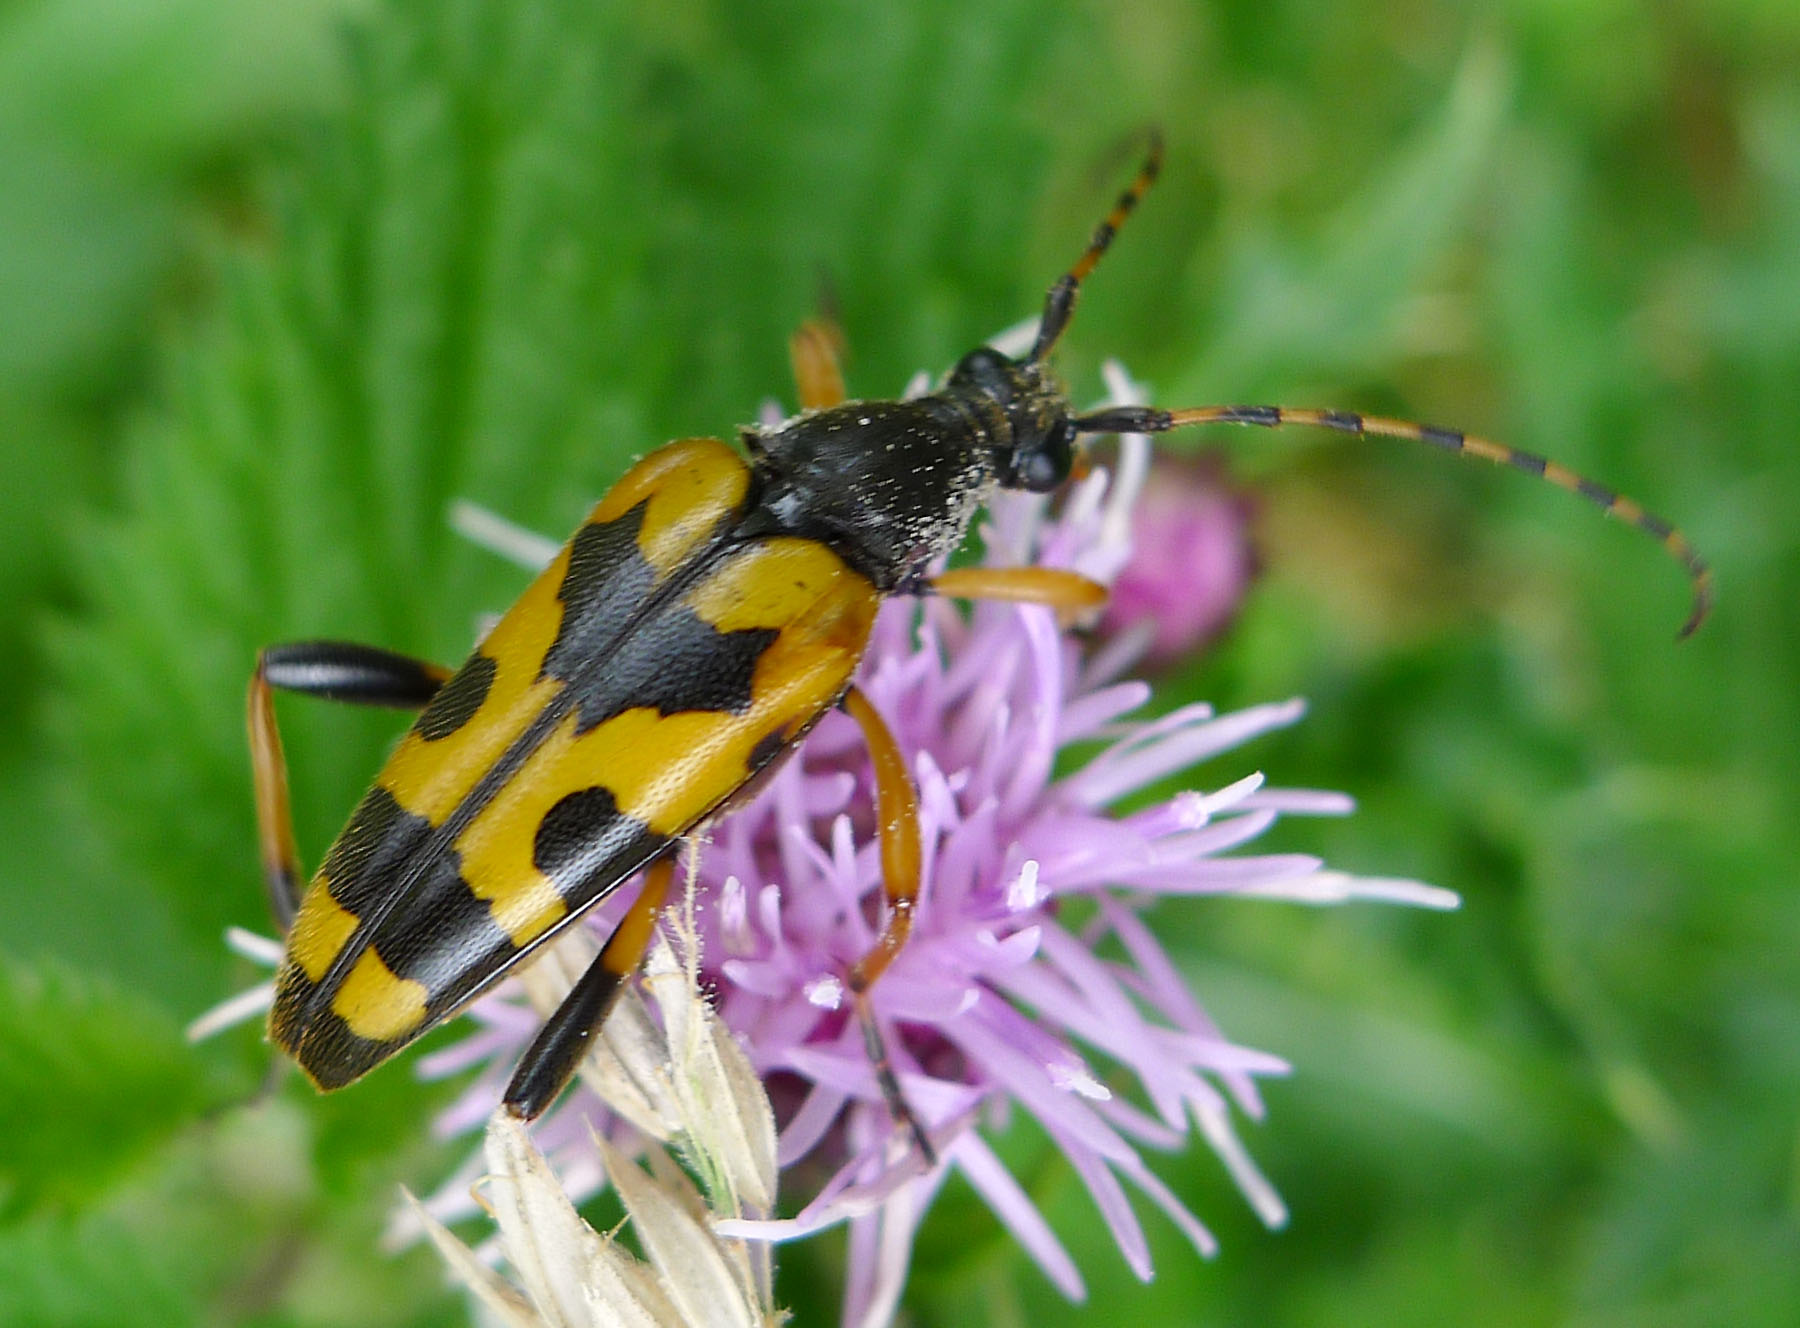 a yellow and black insect standing on some flowers